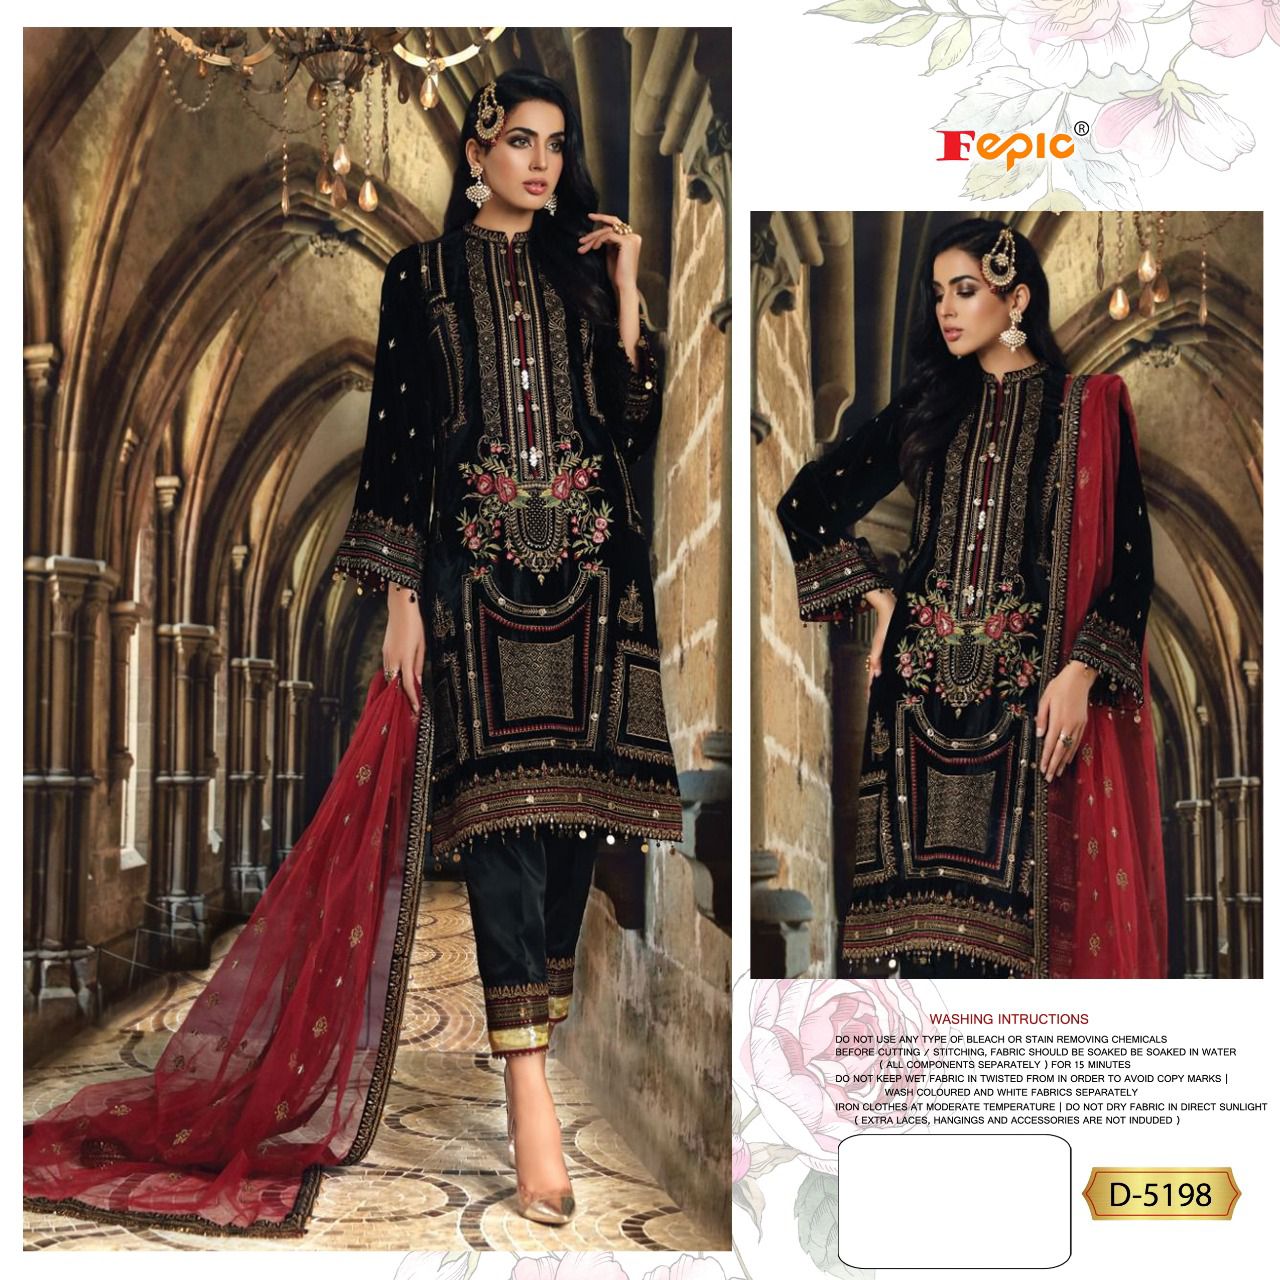 FEPIC ROSEMEEN D-5198 DESIGNER SUIT Anant Tex Exports Private Limited